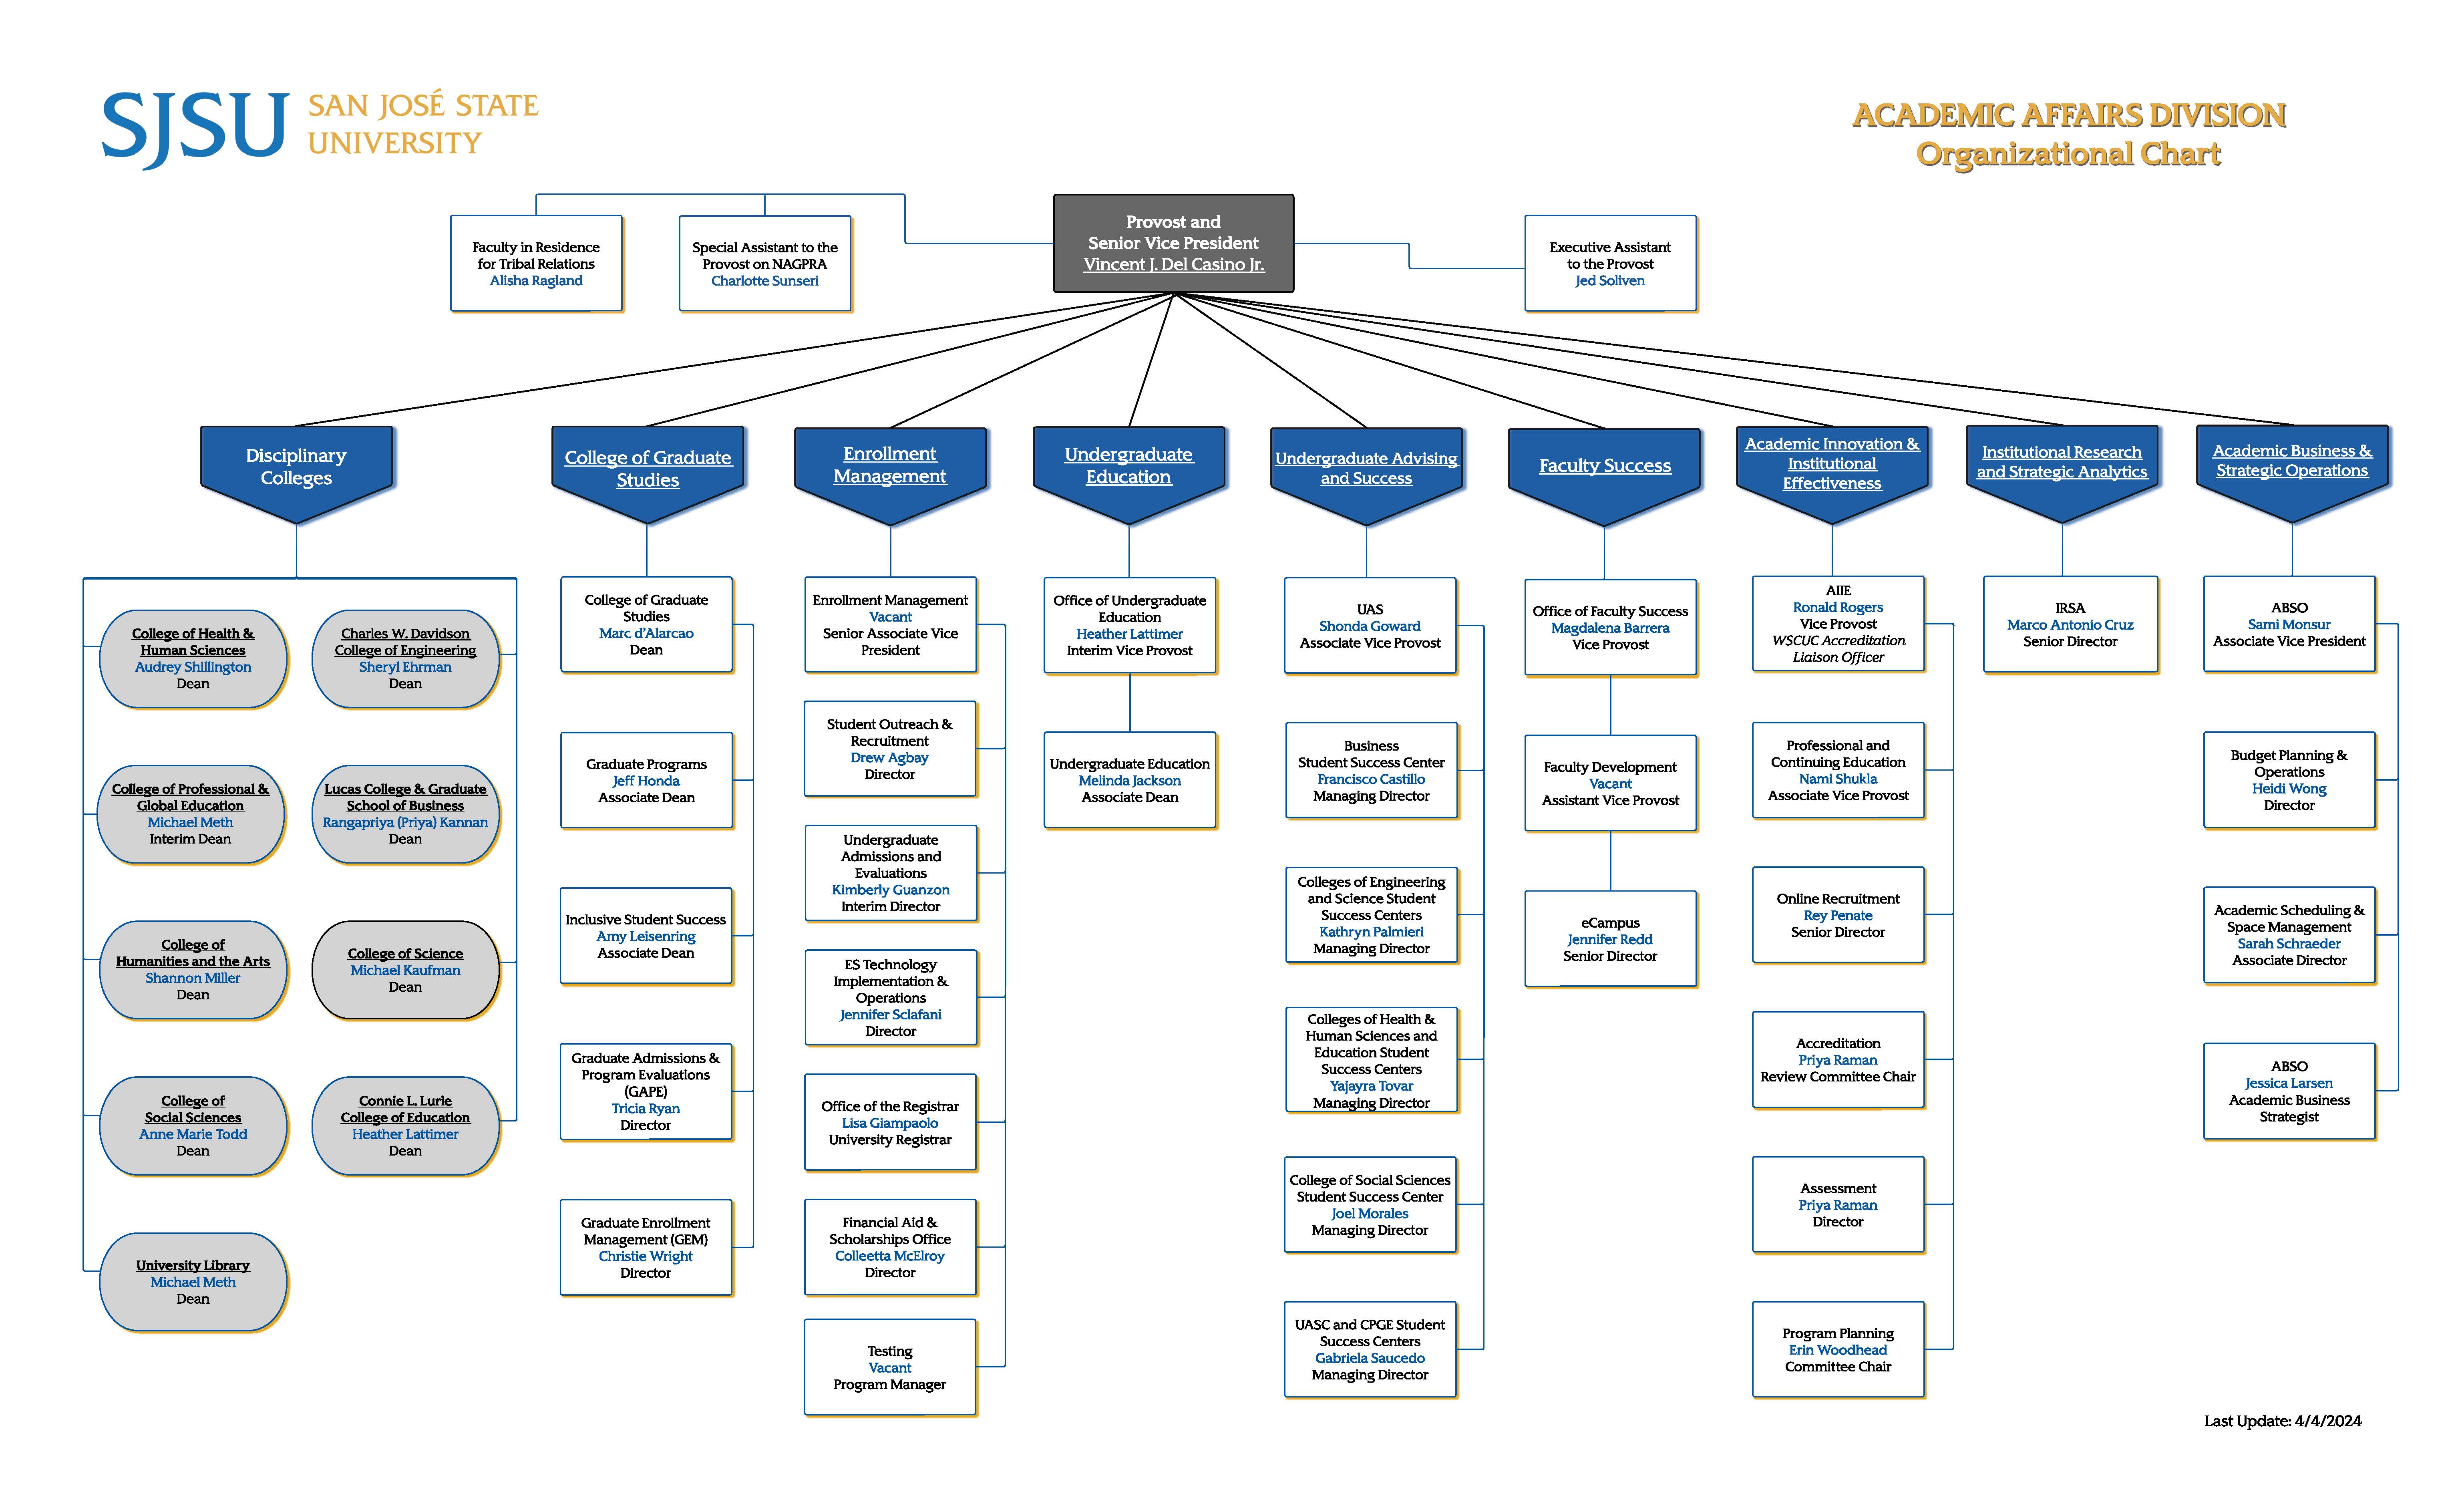 Organizational chart of the academic affairs division